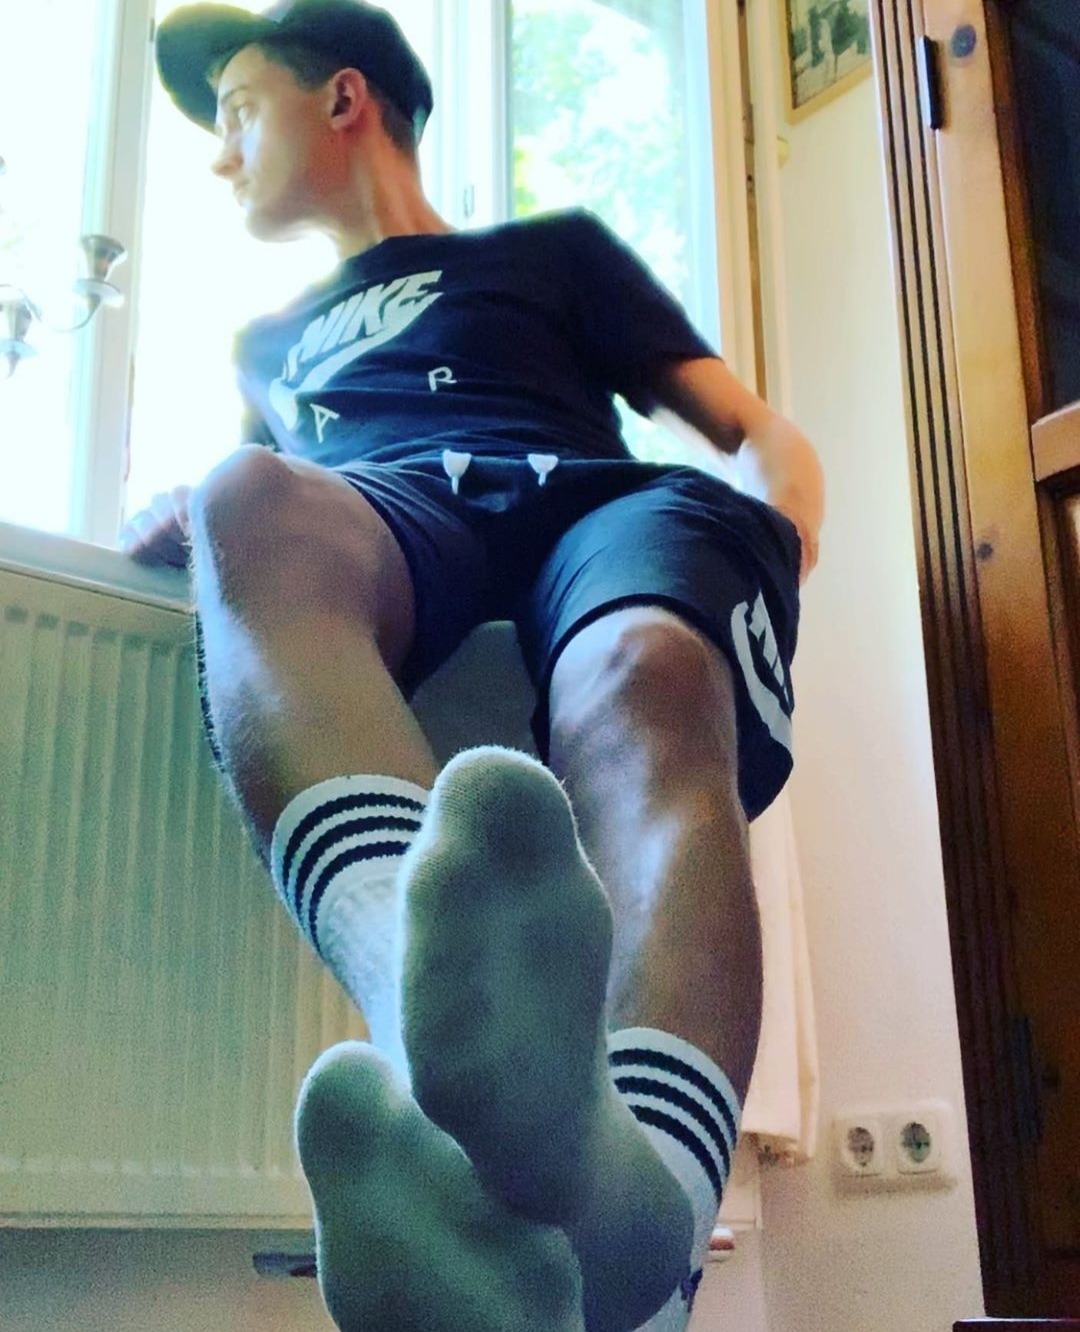 myfaceyourboots:jocks–in–socks:Start sniffing them now faggot. The other guys are coming, you’ll have to sniff their sweaty socked feet too. You’ve got a long, humiliating, abusive Sunday ahead of you, cum dump.